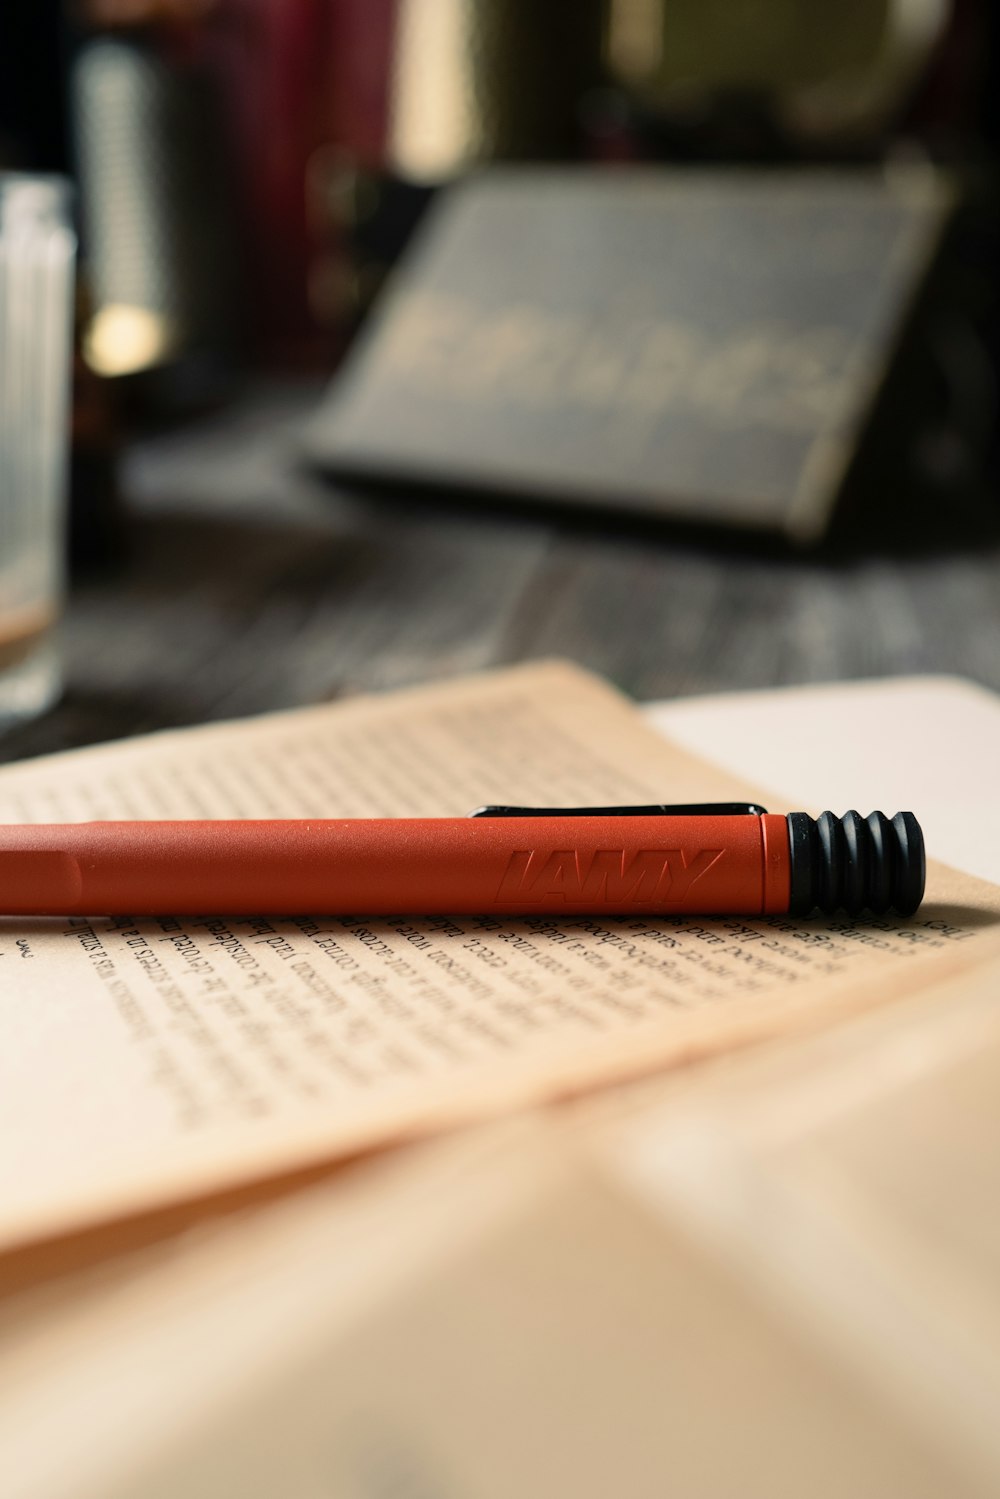 a red pen sitting on top of an open book